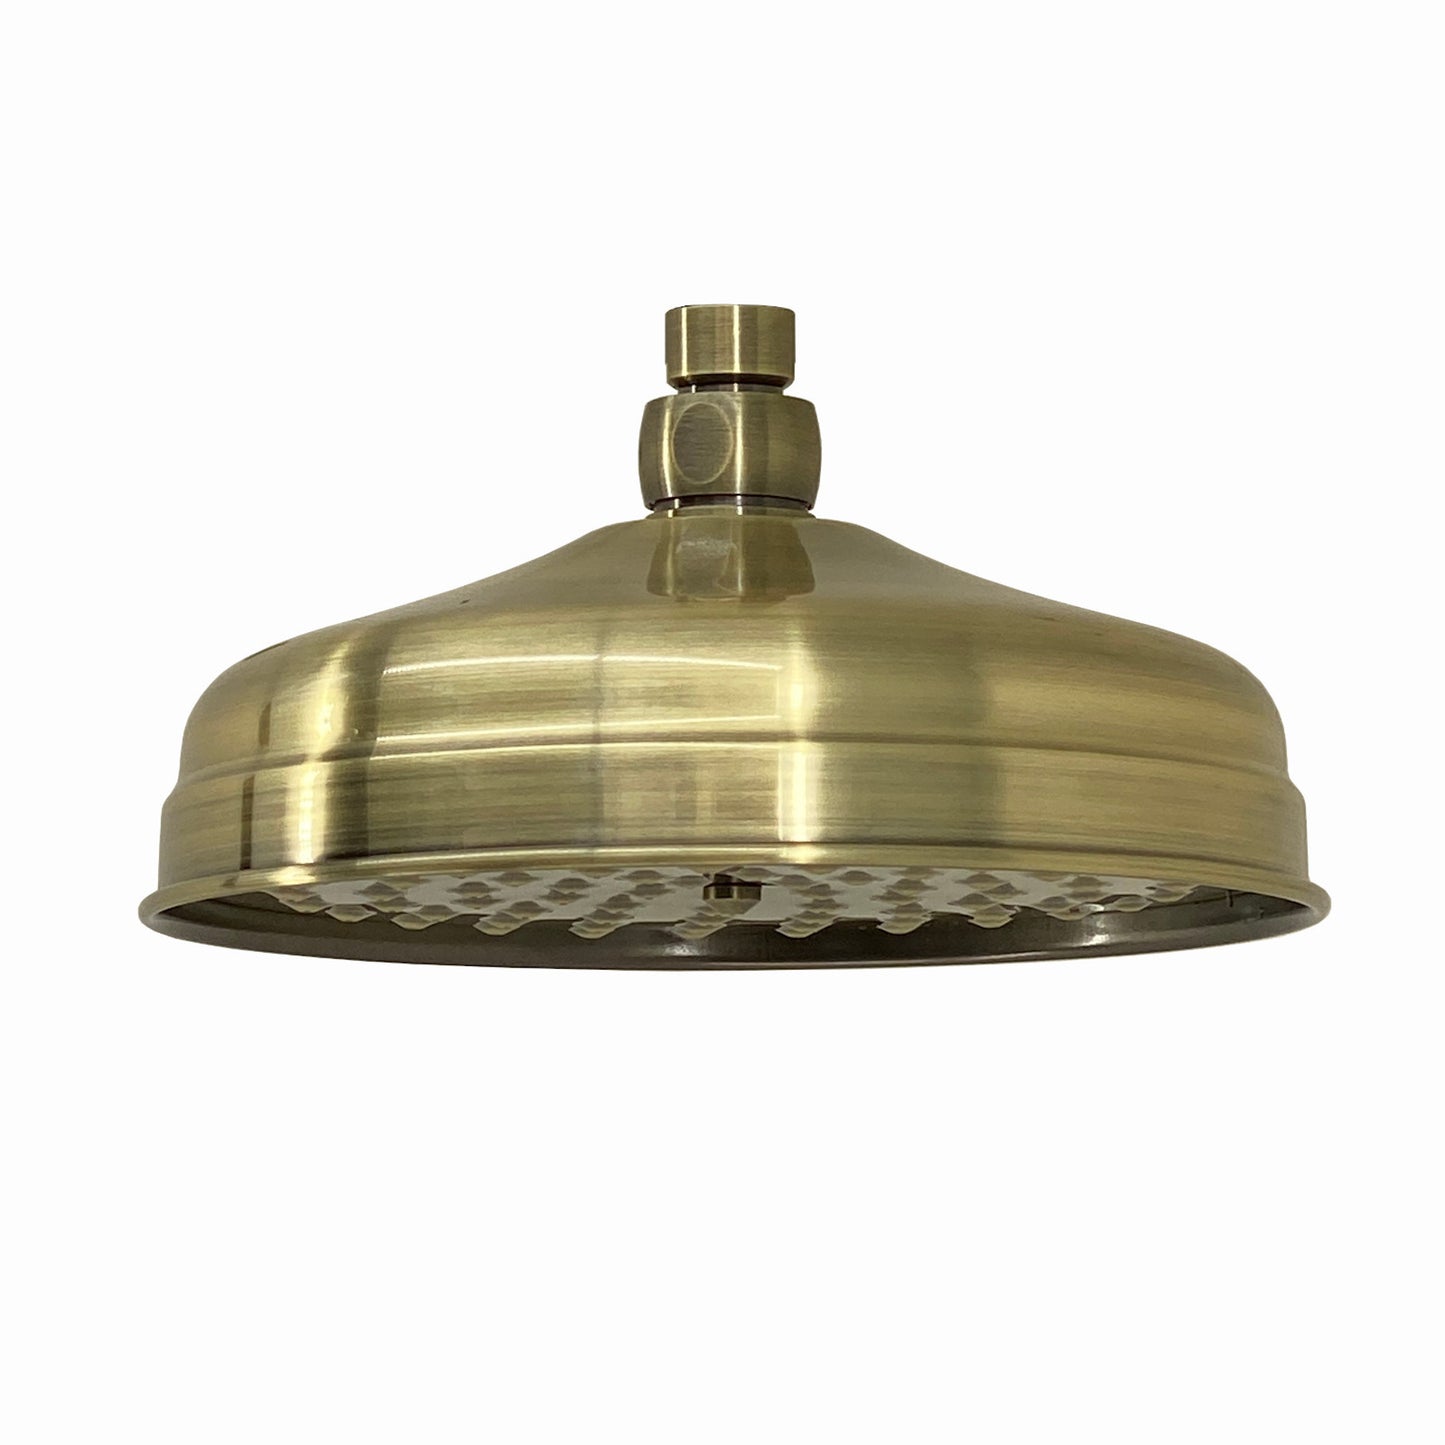 Traditional Wall Fixed Apron Brass Shower Head 8" With Shower Arm - Antique Bronze